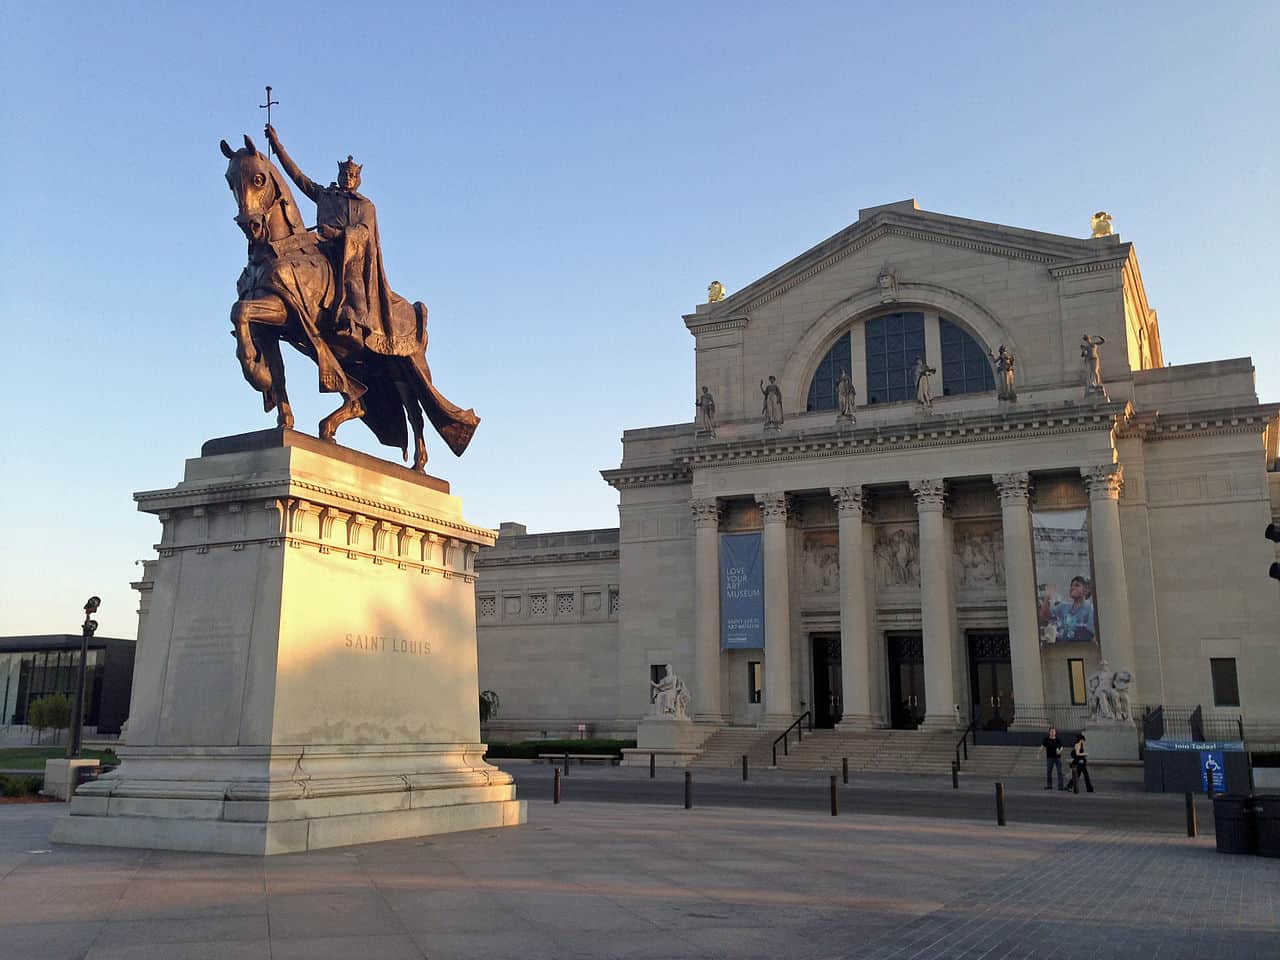 The Apotheosis of St. Louis in front of the St. Louis Art Museum in Forest Park. Photo Credit: Fredlyfish4/Wikimedia Commons